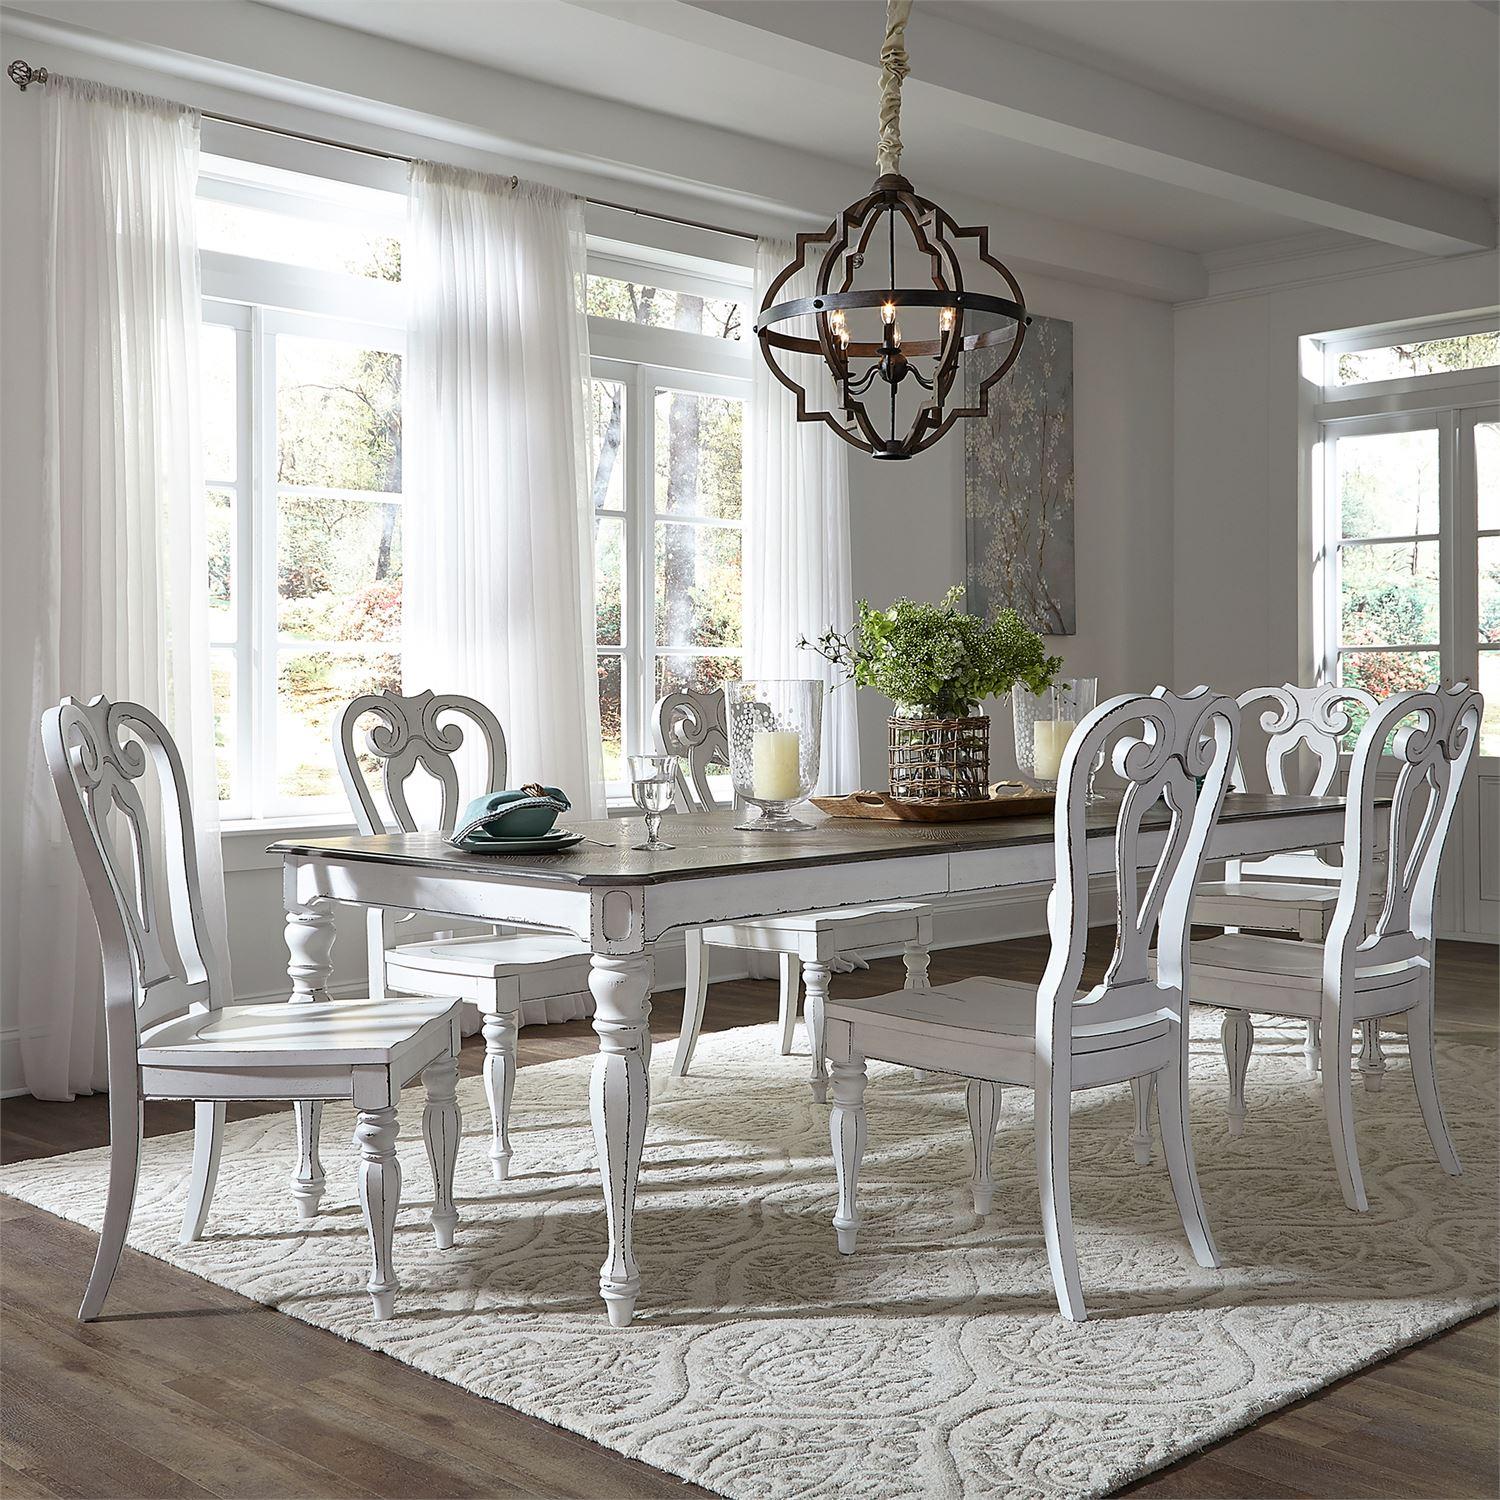 European Traditional Dining Table Set Magnolia Manor  (244-DR) Dining Room Set 244-DR-O7LGS in White 